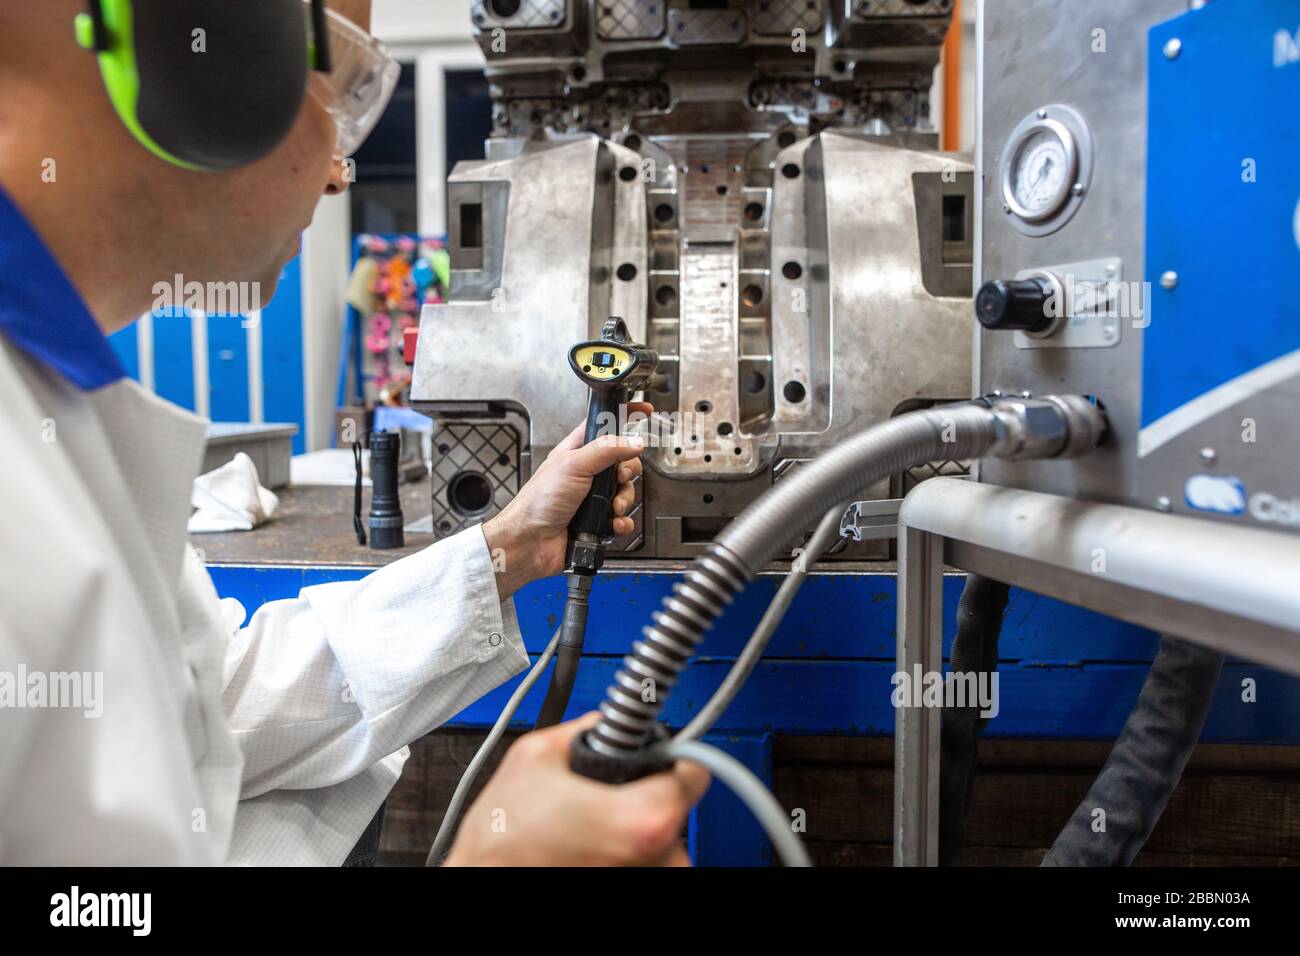 Engineer doing maintenance on a injection mold for plastic components, industrial and automotive concept Stock Photo